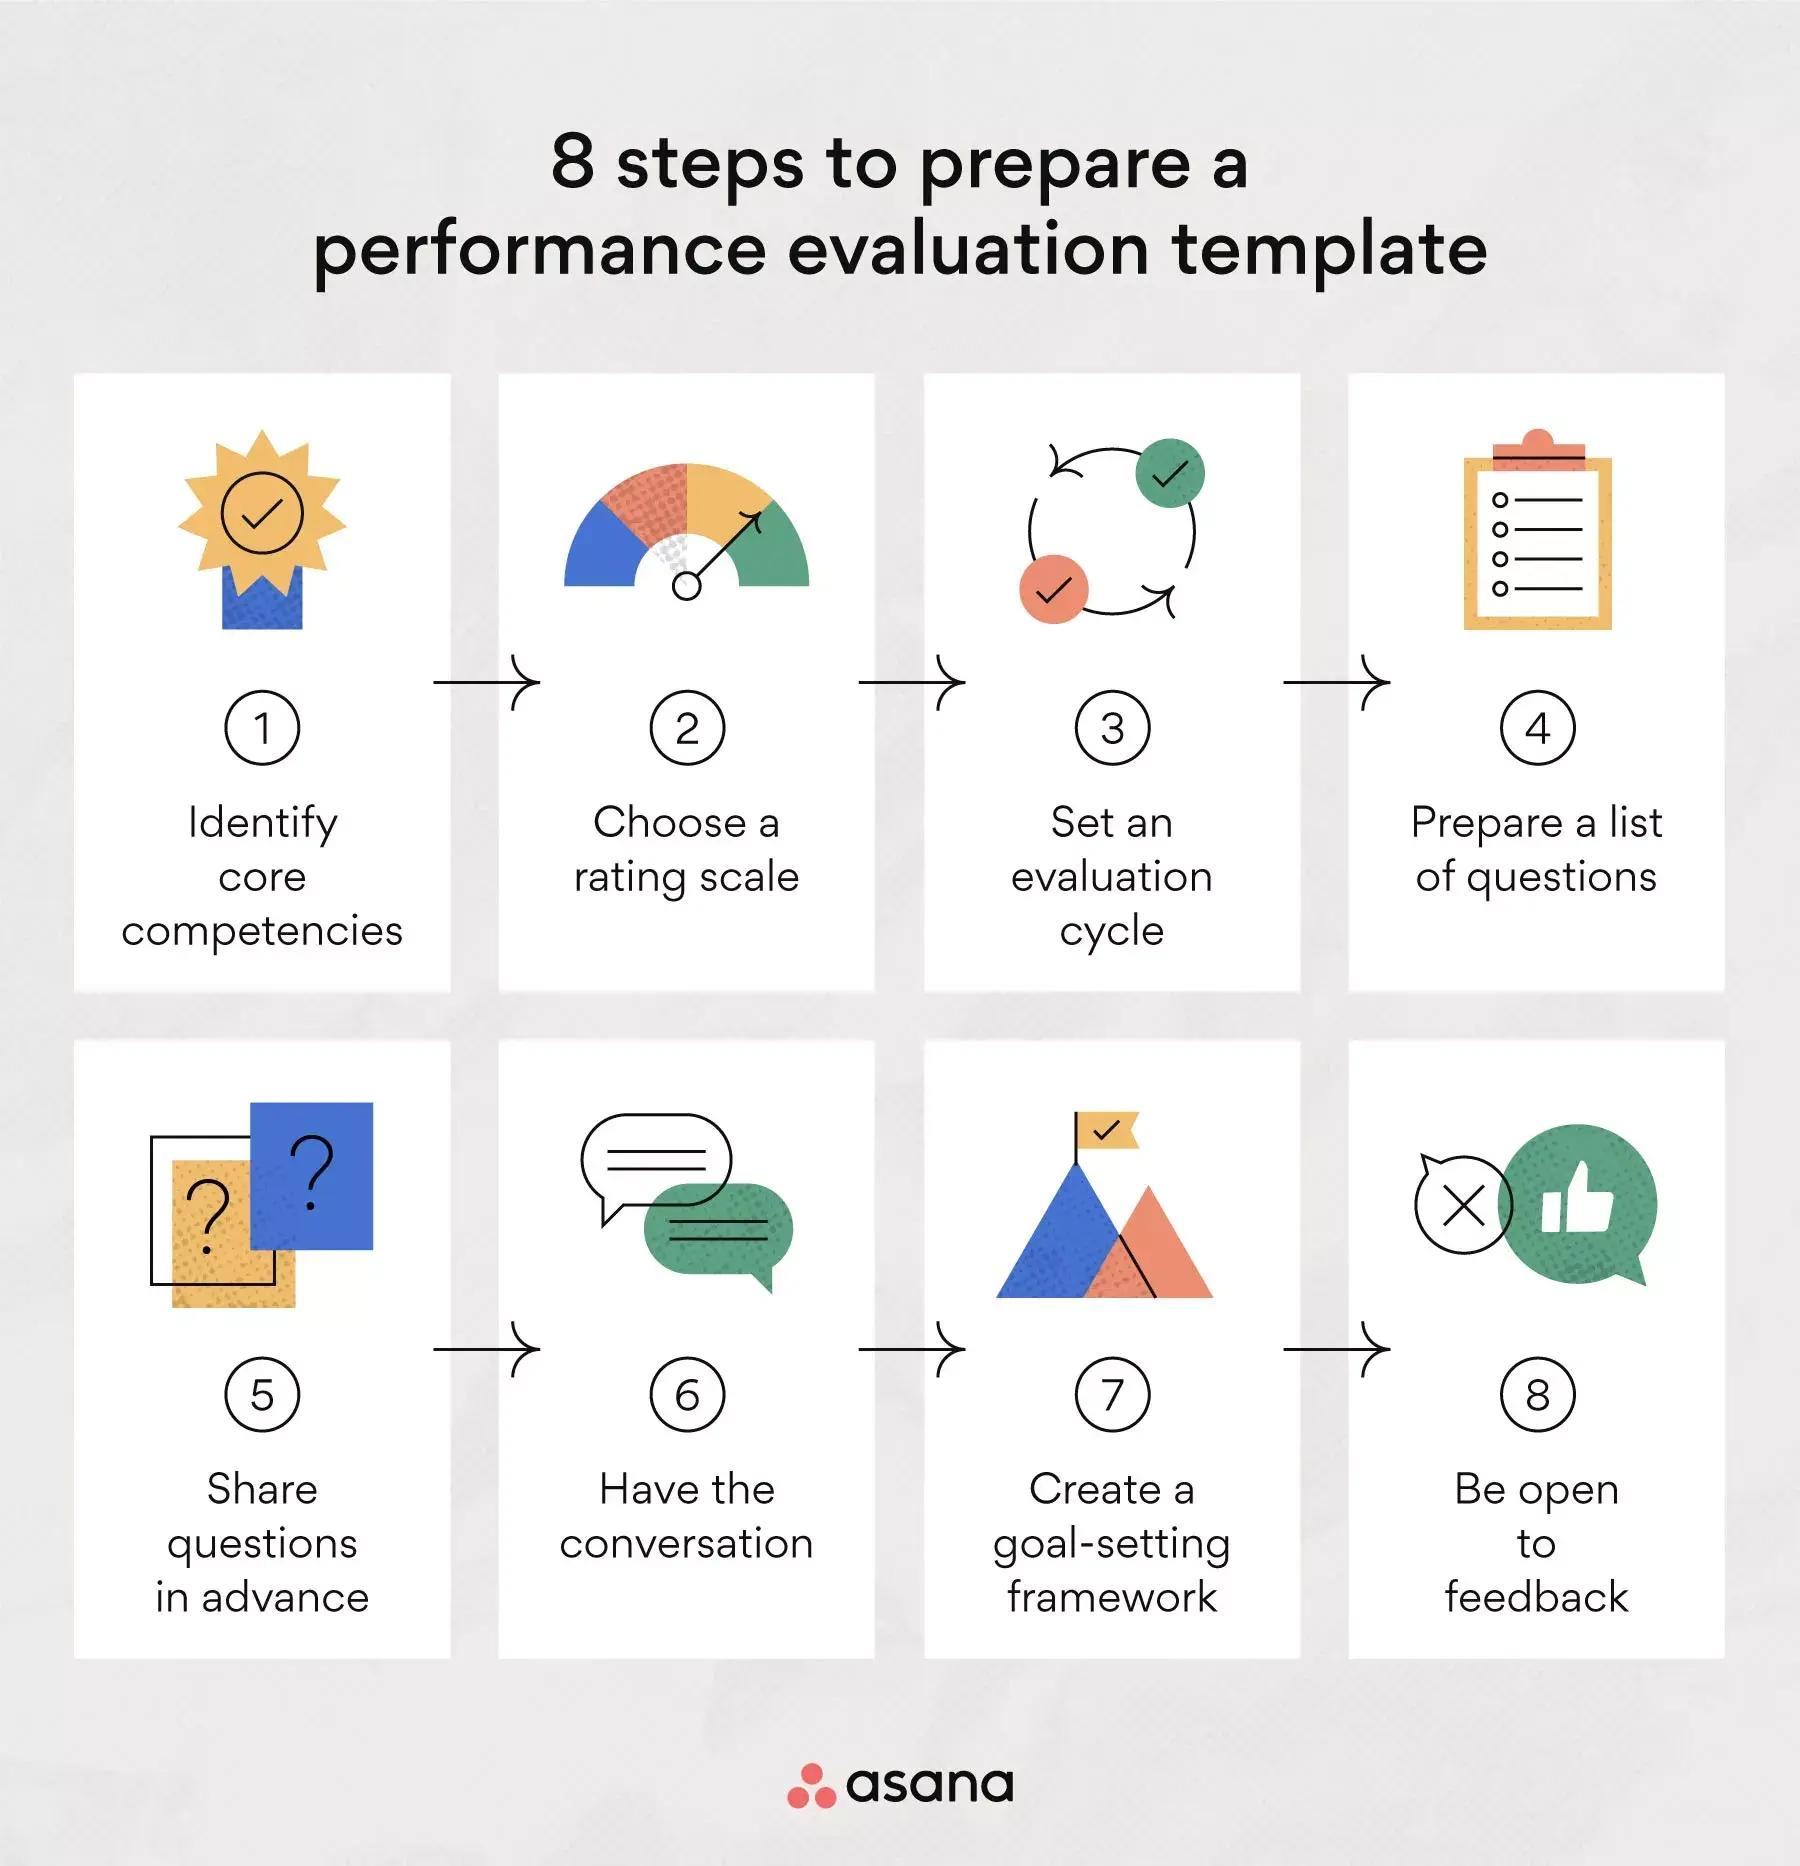 [inline illustration] 8 steps to prepare a performance evaluation template (infographic)